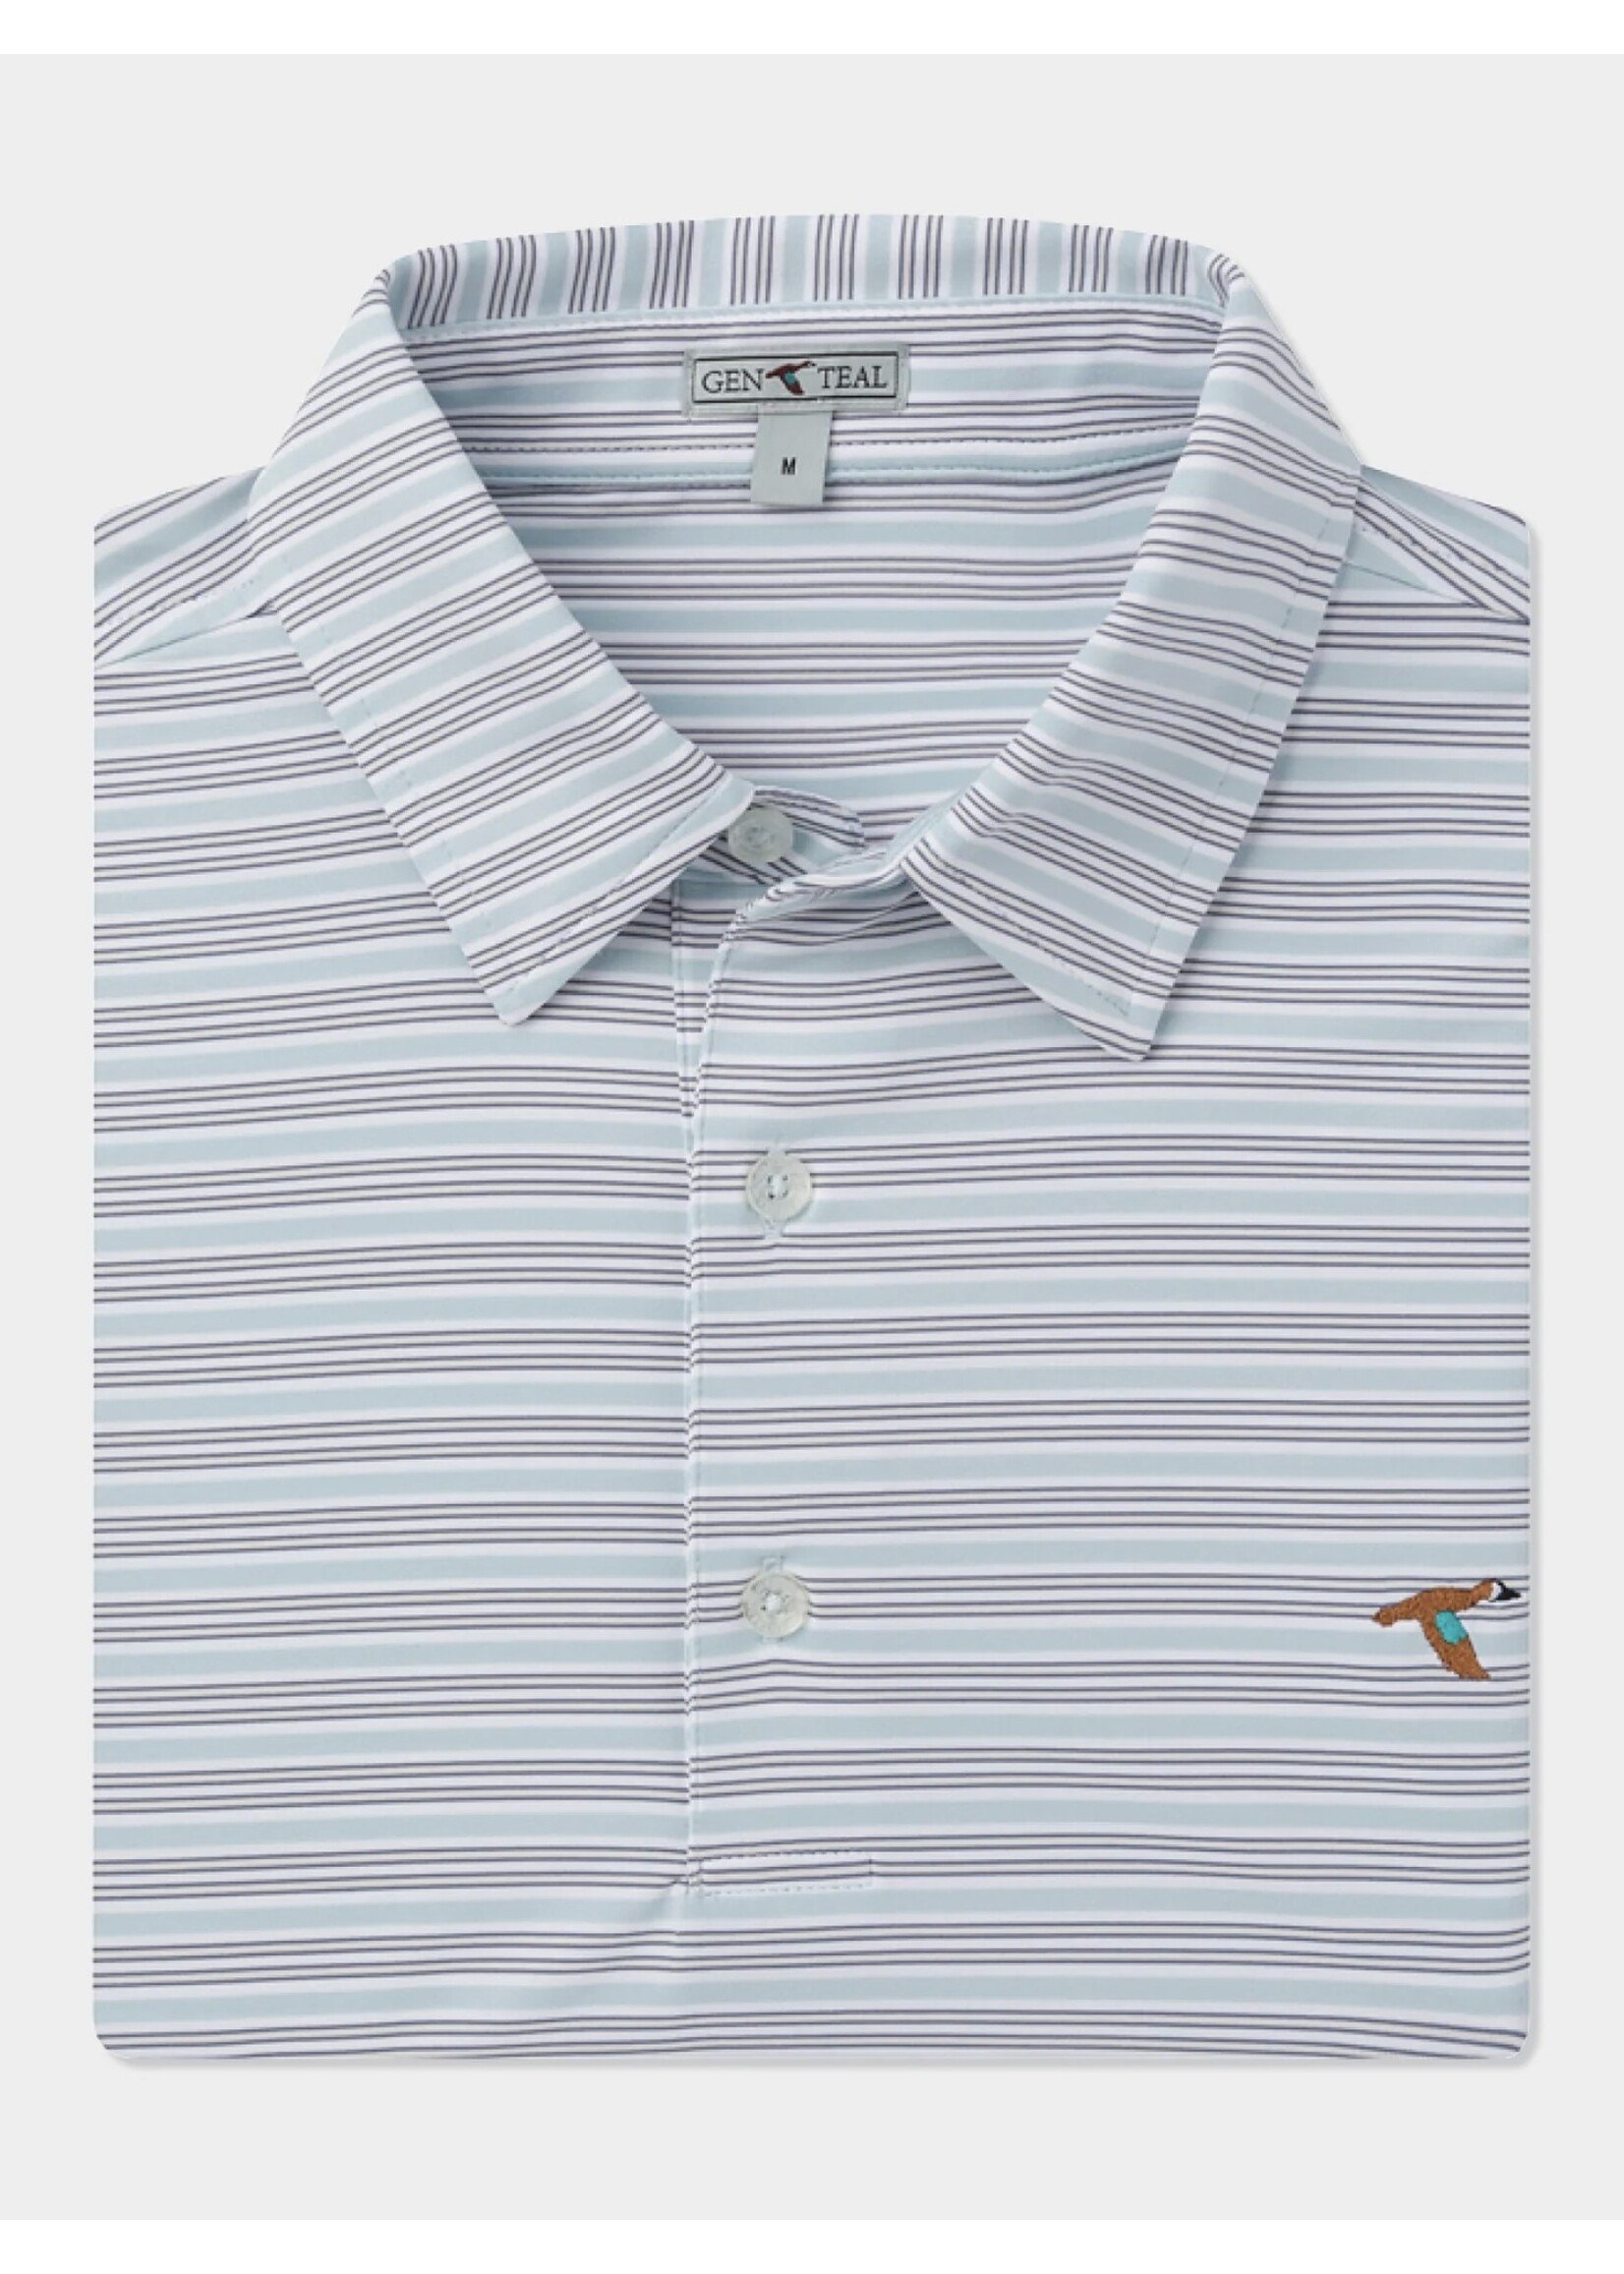 GenTeal Apparel McKinley Performance Polo